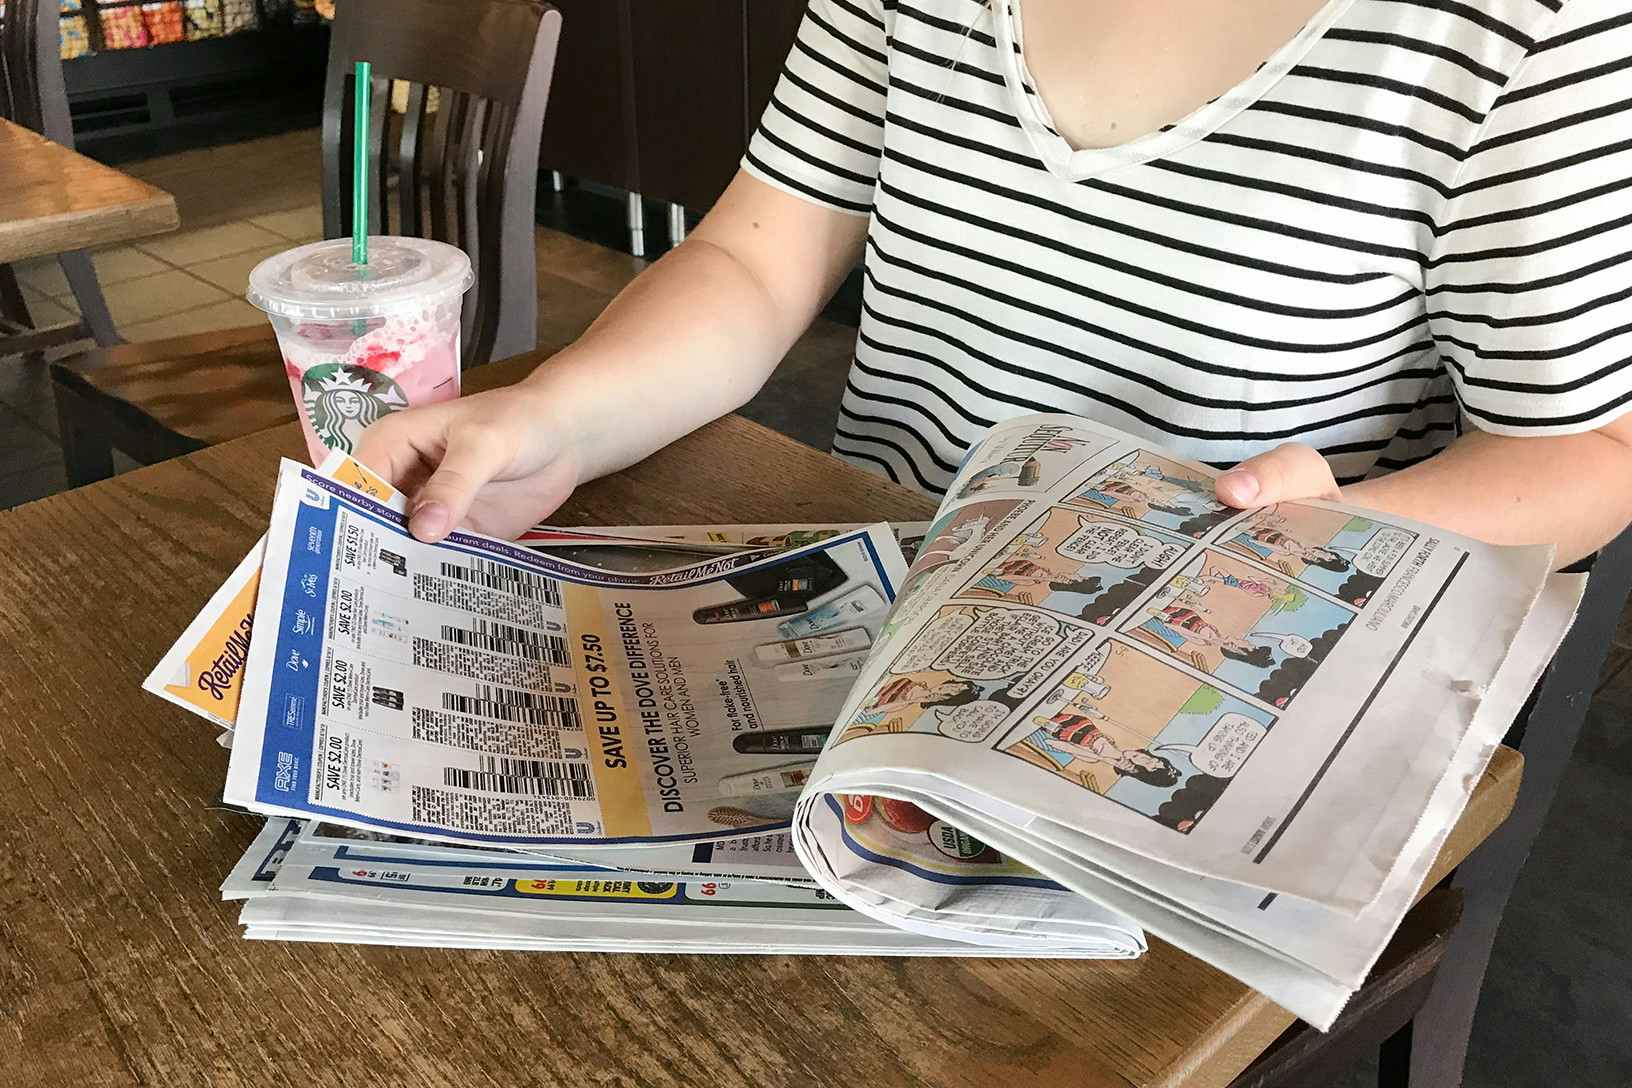 A person holding some coupons while sitting at a table with a starbucks cup on the table next to the coupons.